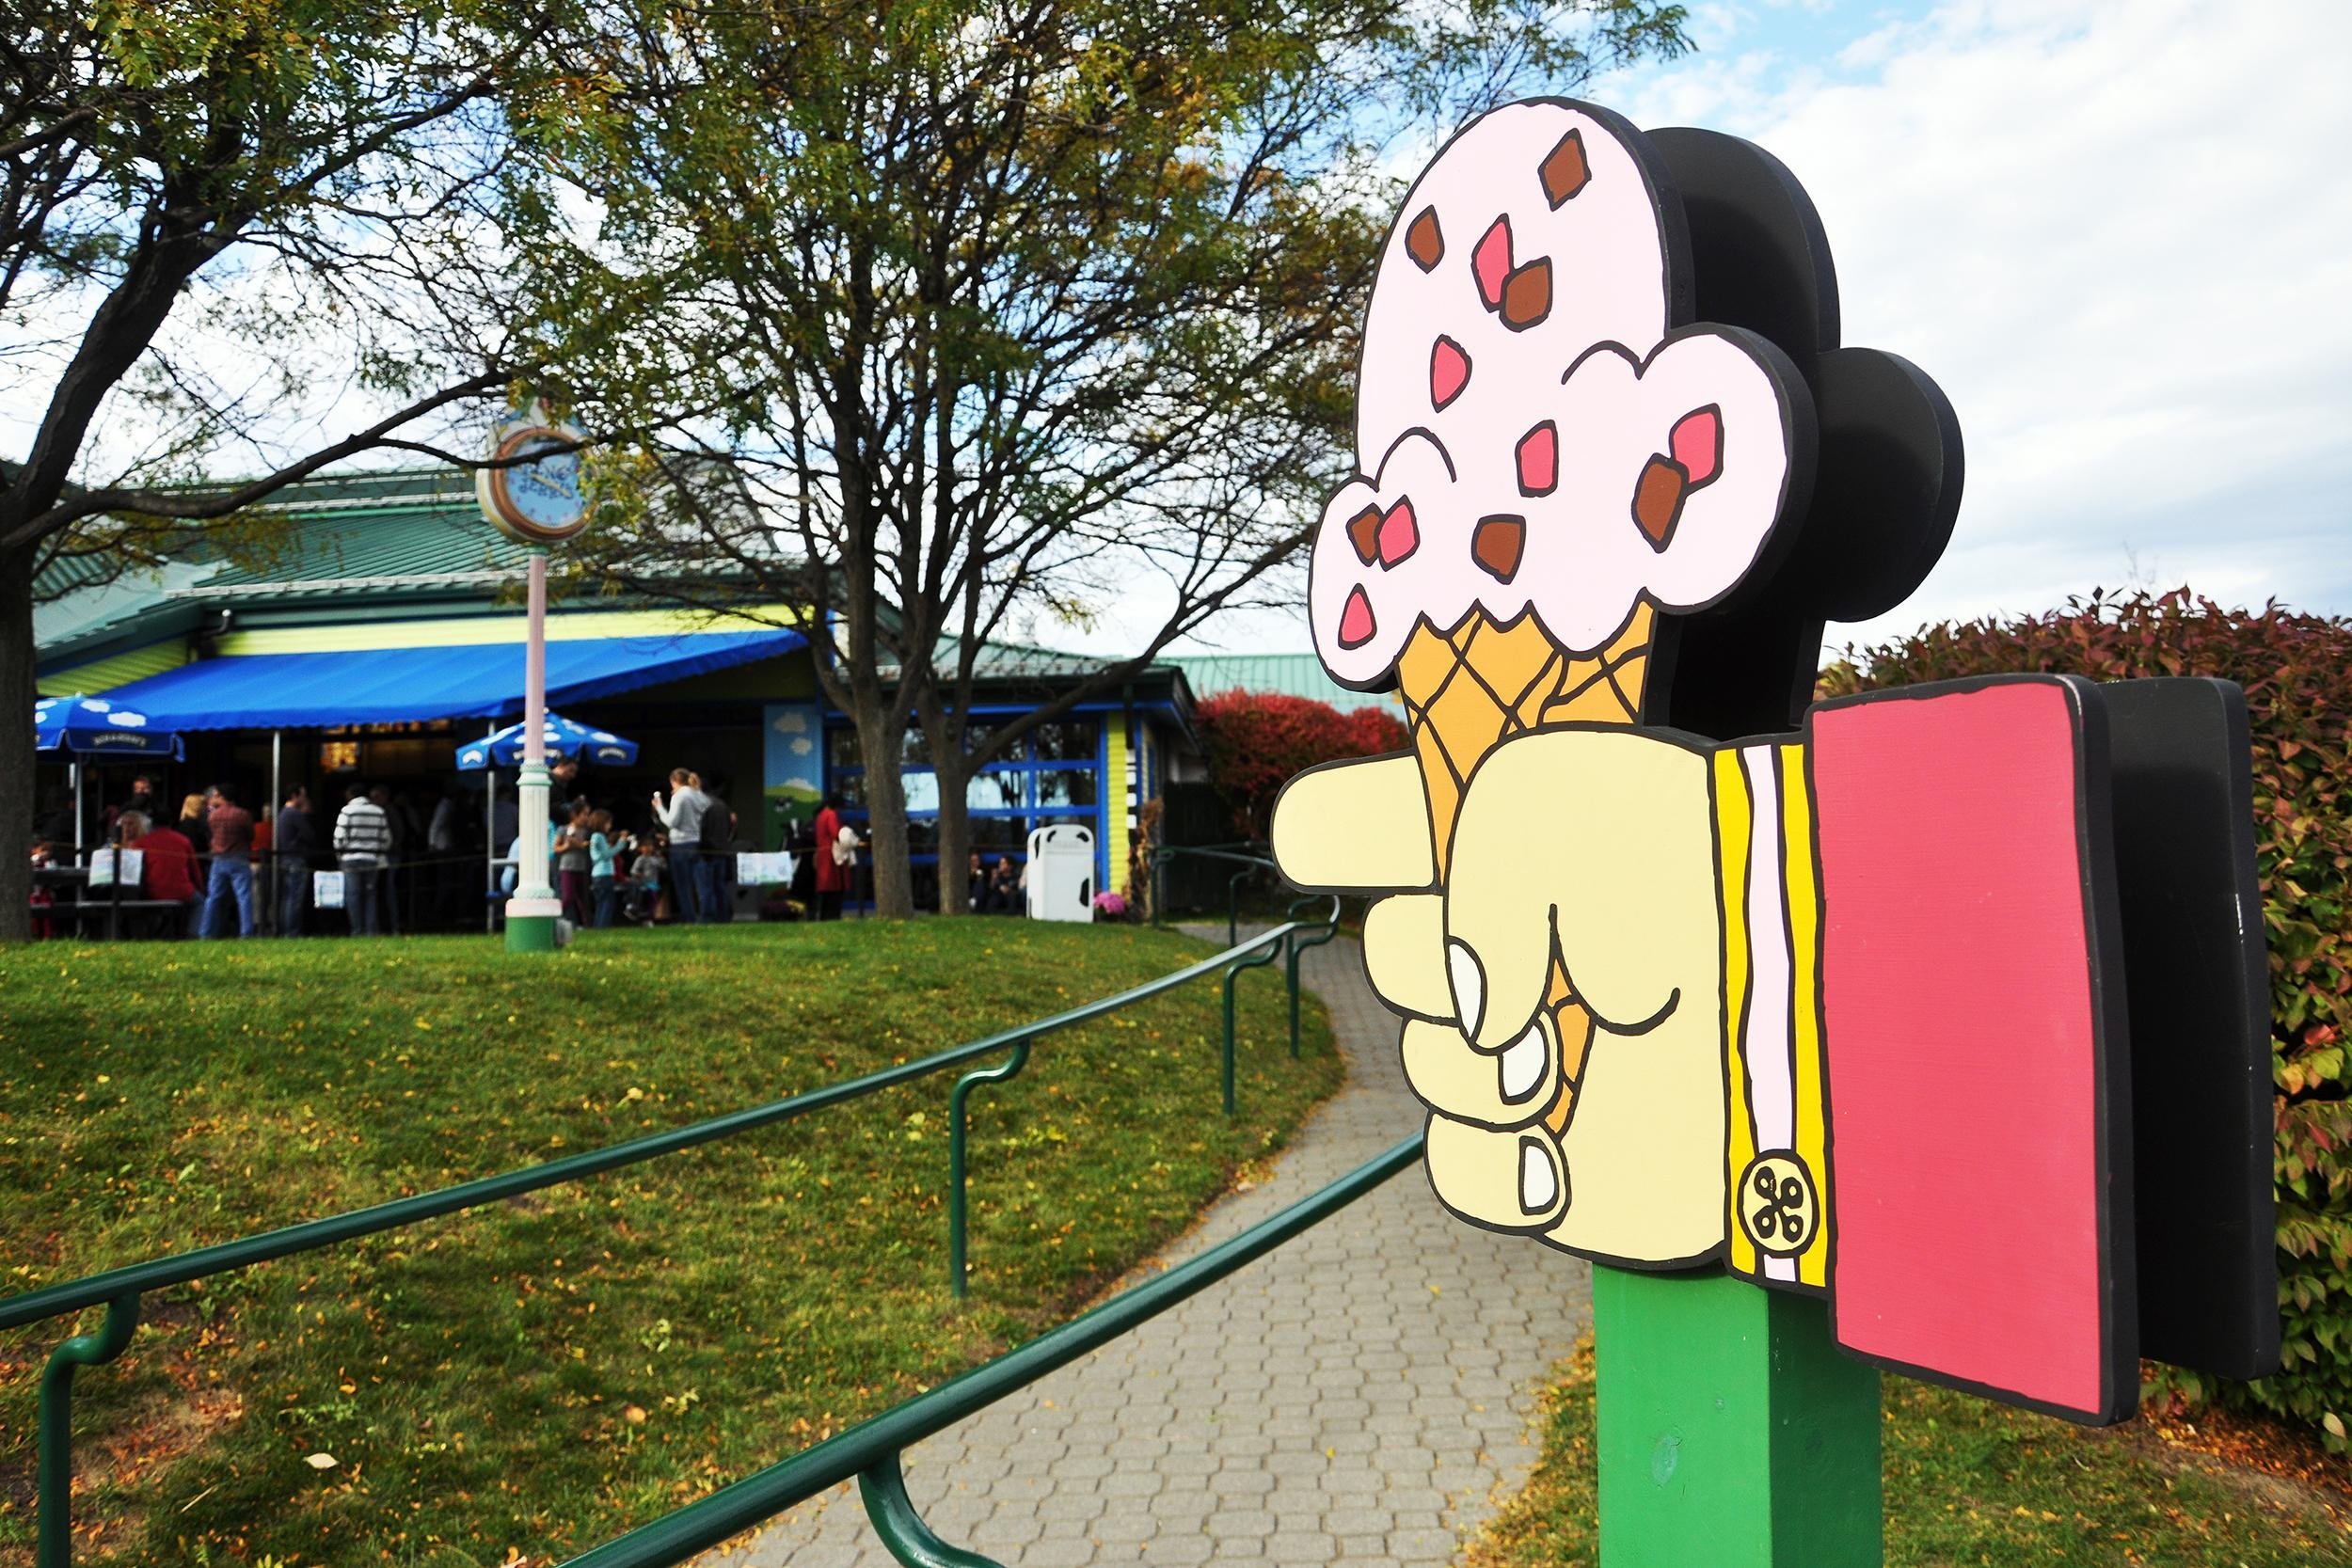 <p>The <a href="https://www.benjerry.com/about-us/factory-tours">Ben & Jerry’s Factory</a> in Waterbury is a dairy mecca for ice cream fanatics with tours including a<a href="https://www.benjerry.com/flavors/flavor-graveyard"> flavor graveyard</a> where you can pay your respects to your favorite “dearly de-pinted flavors.” Tours are currently on hold. </p>